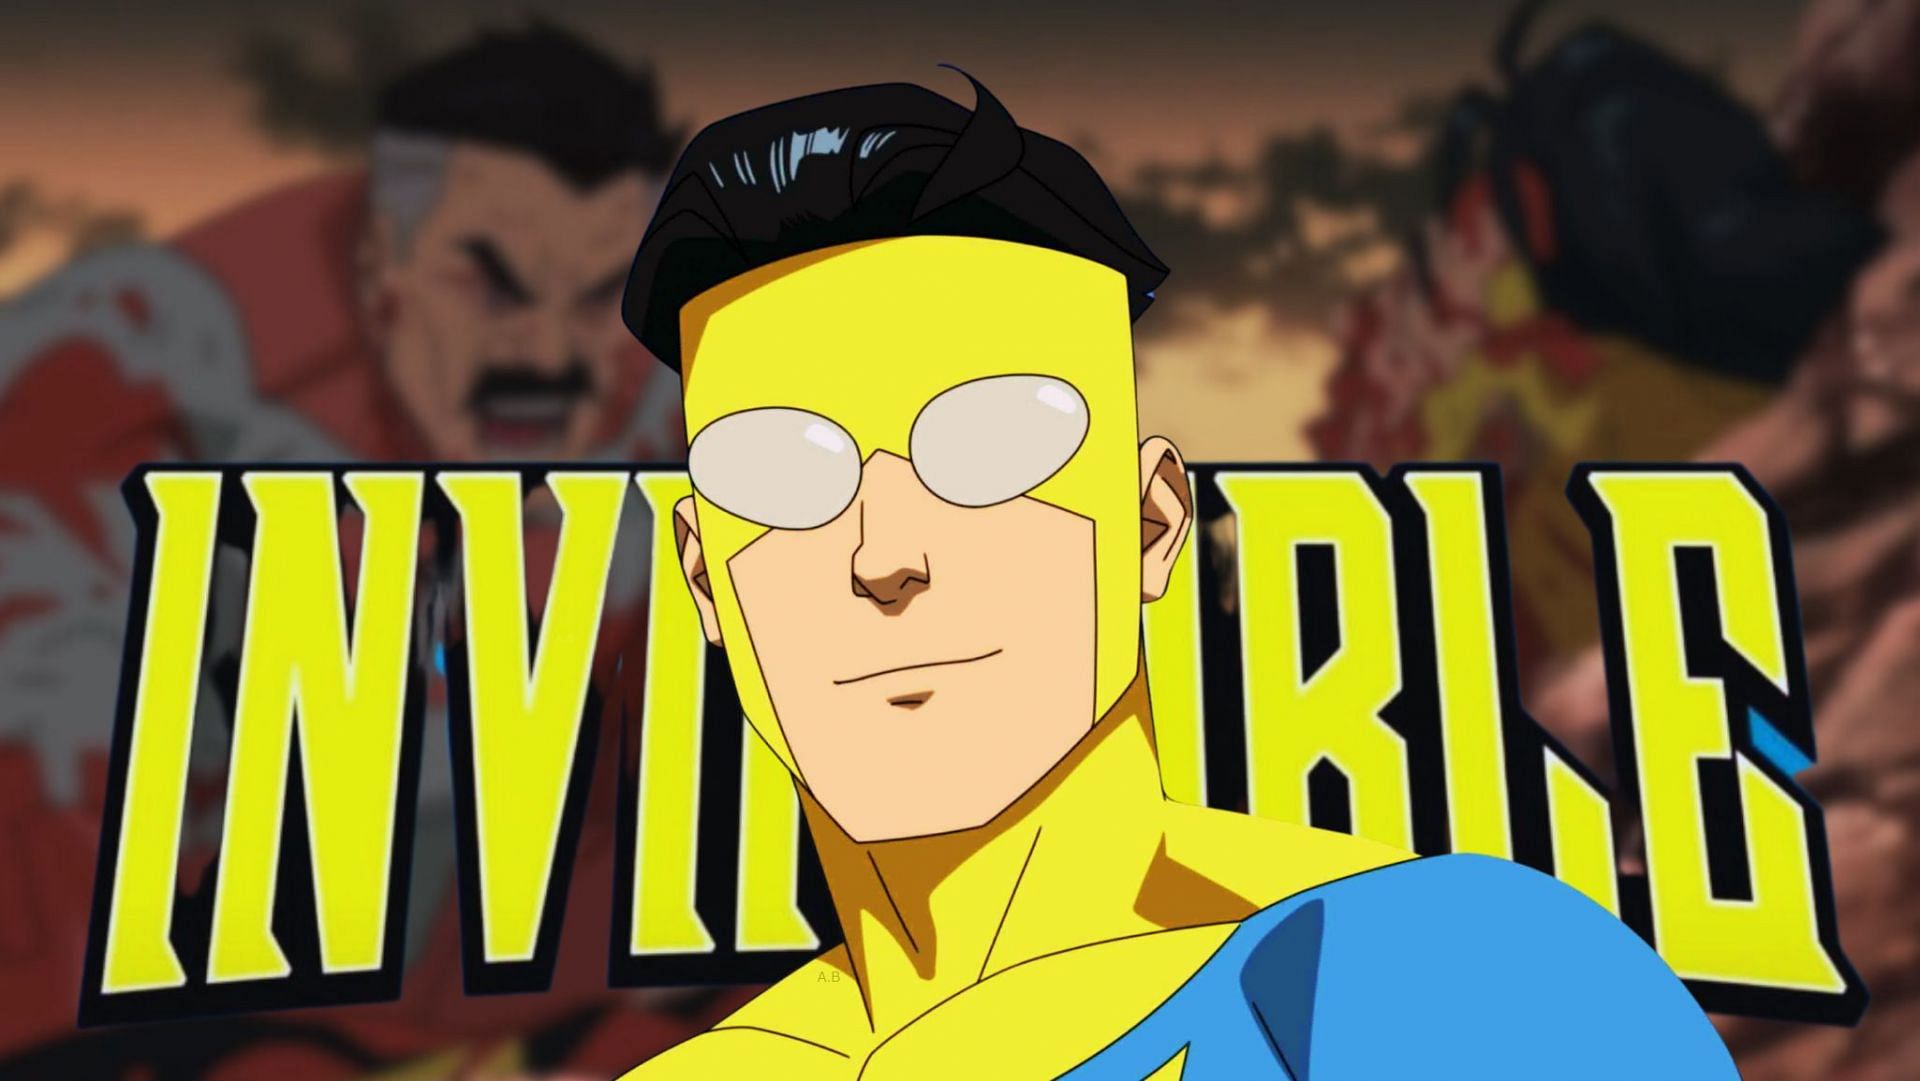 The wait is over! Invincible Season 2 premiere date unveiled at San Diego Comic-Con (Image via Sportskeeda)